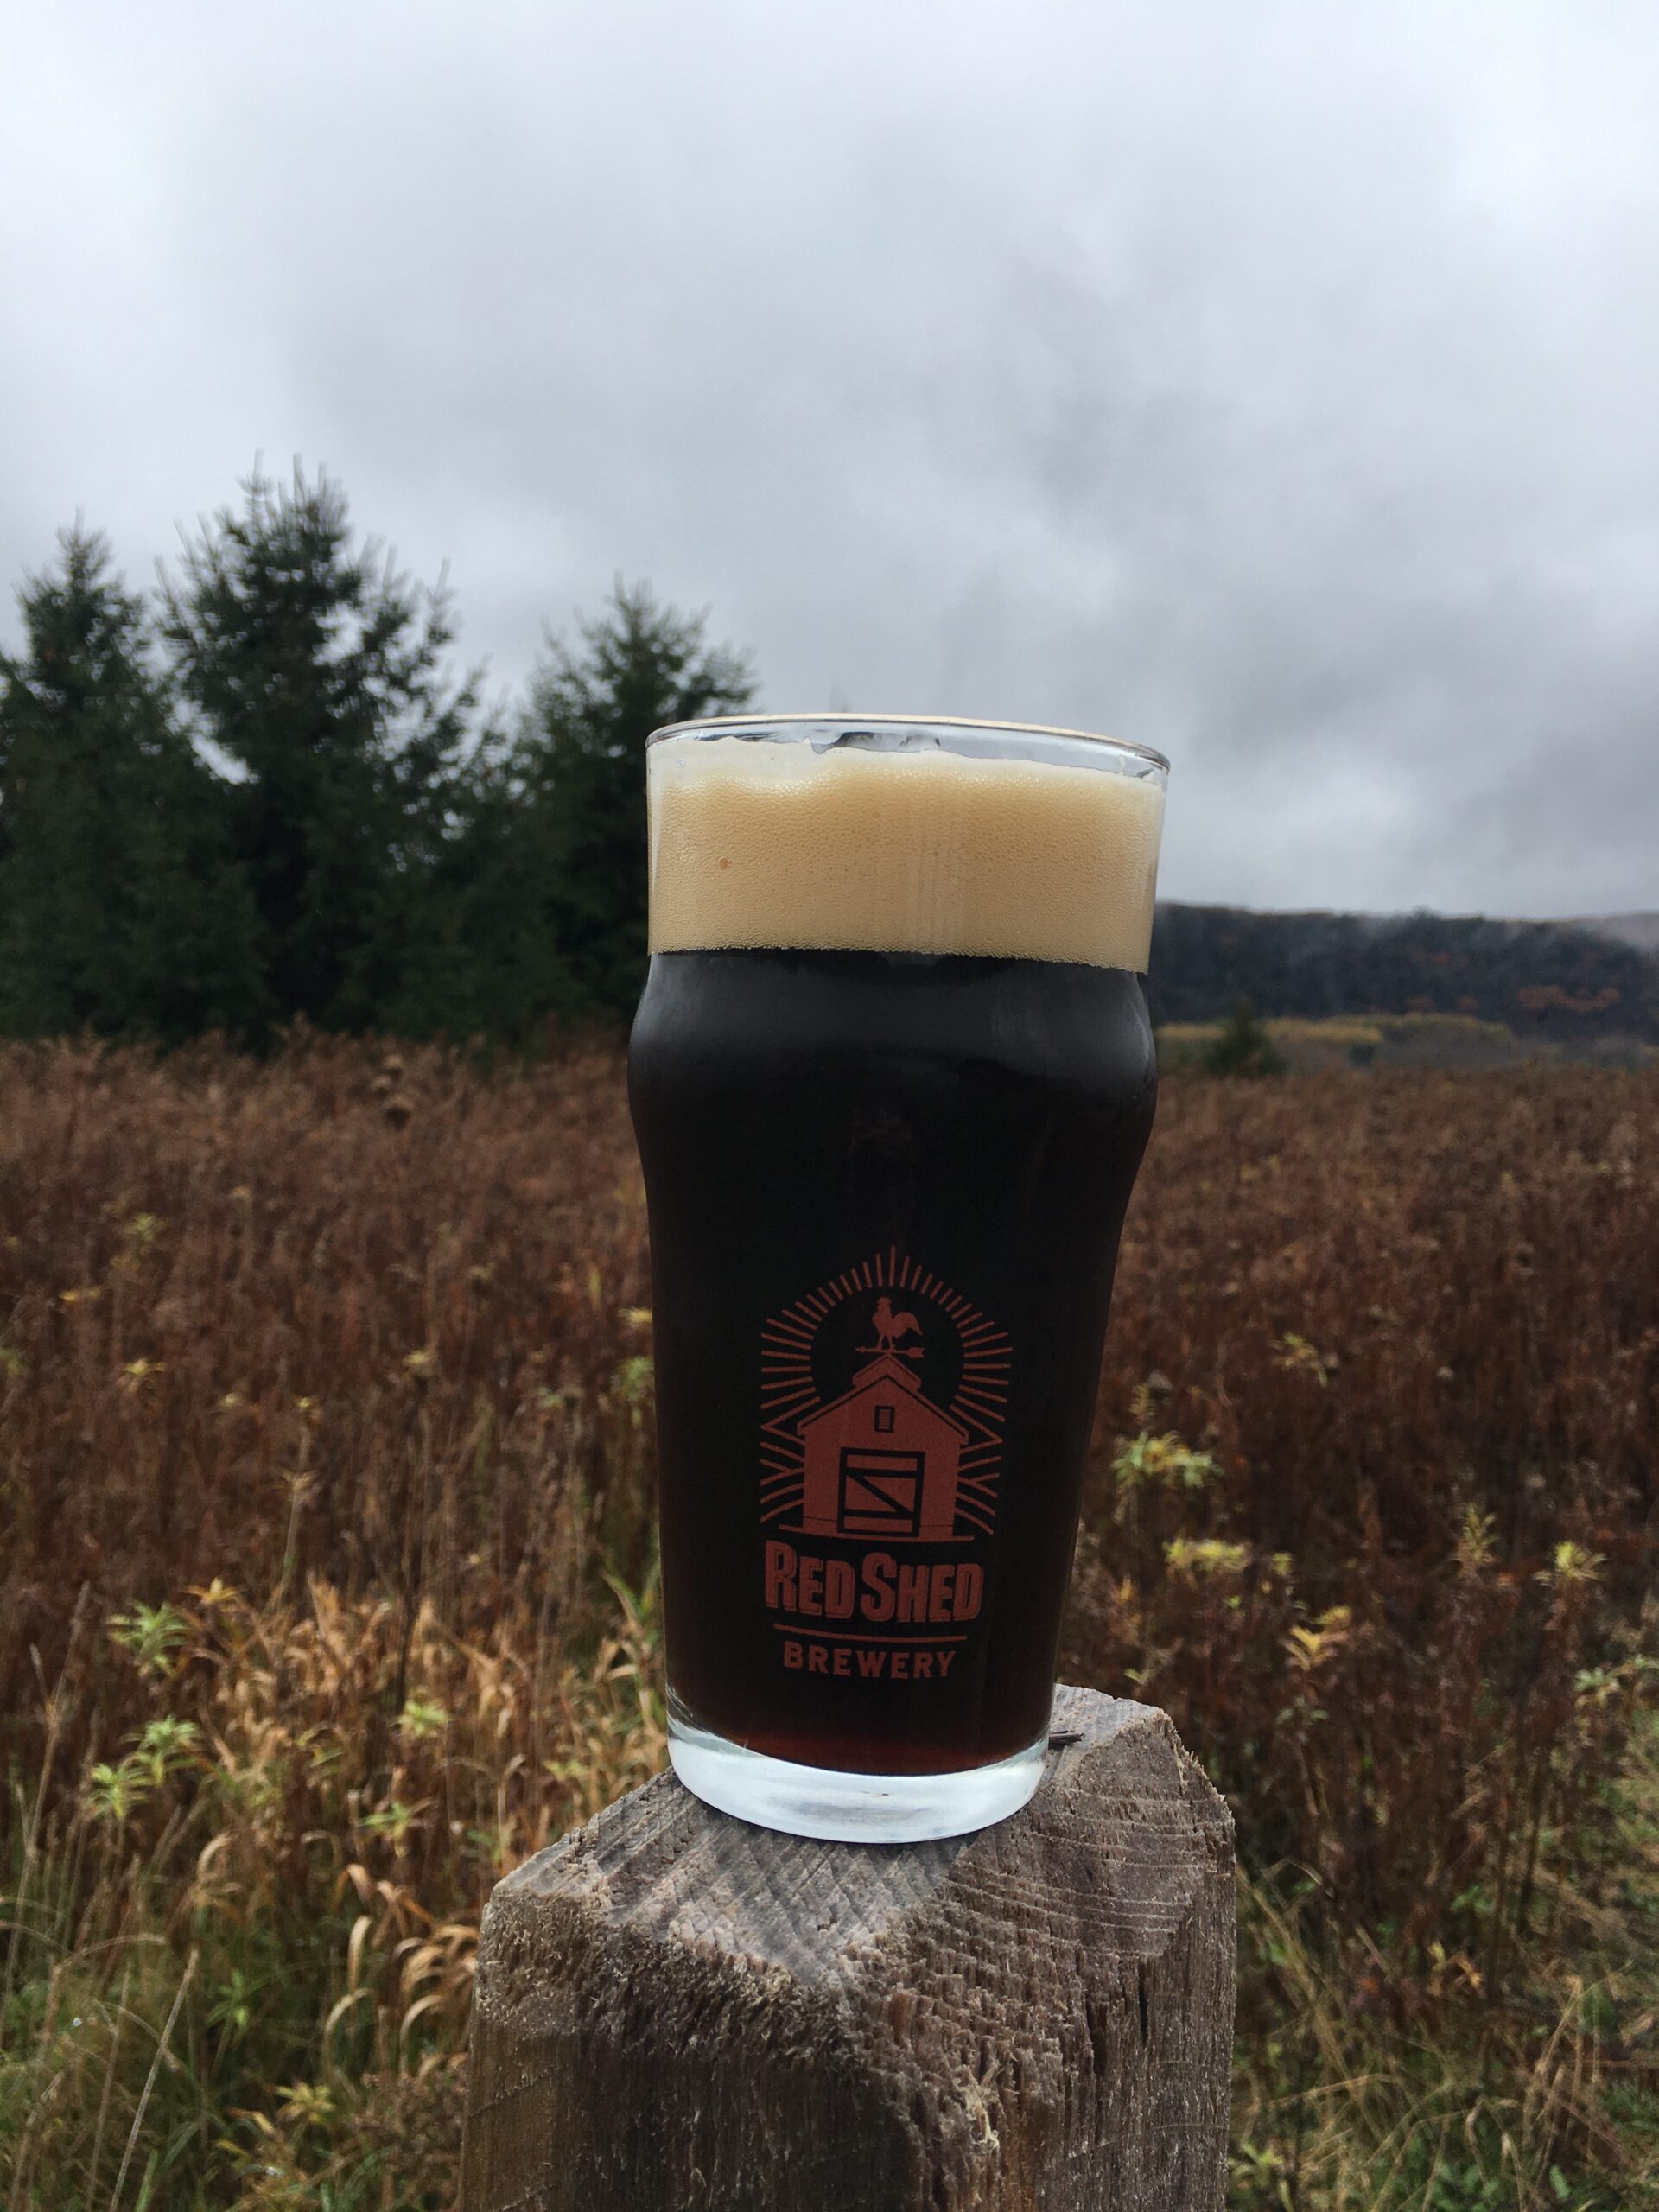 Cherry Valley Smoked Porter, Red Shed Brewing